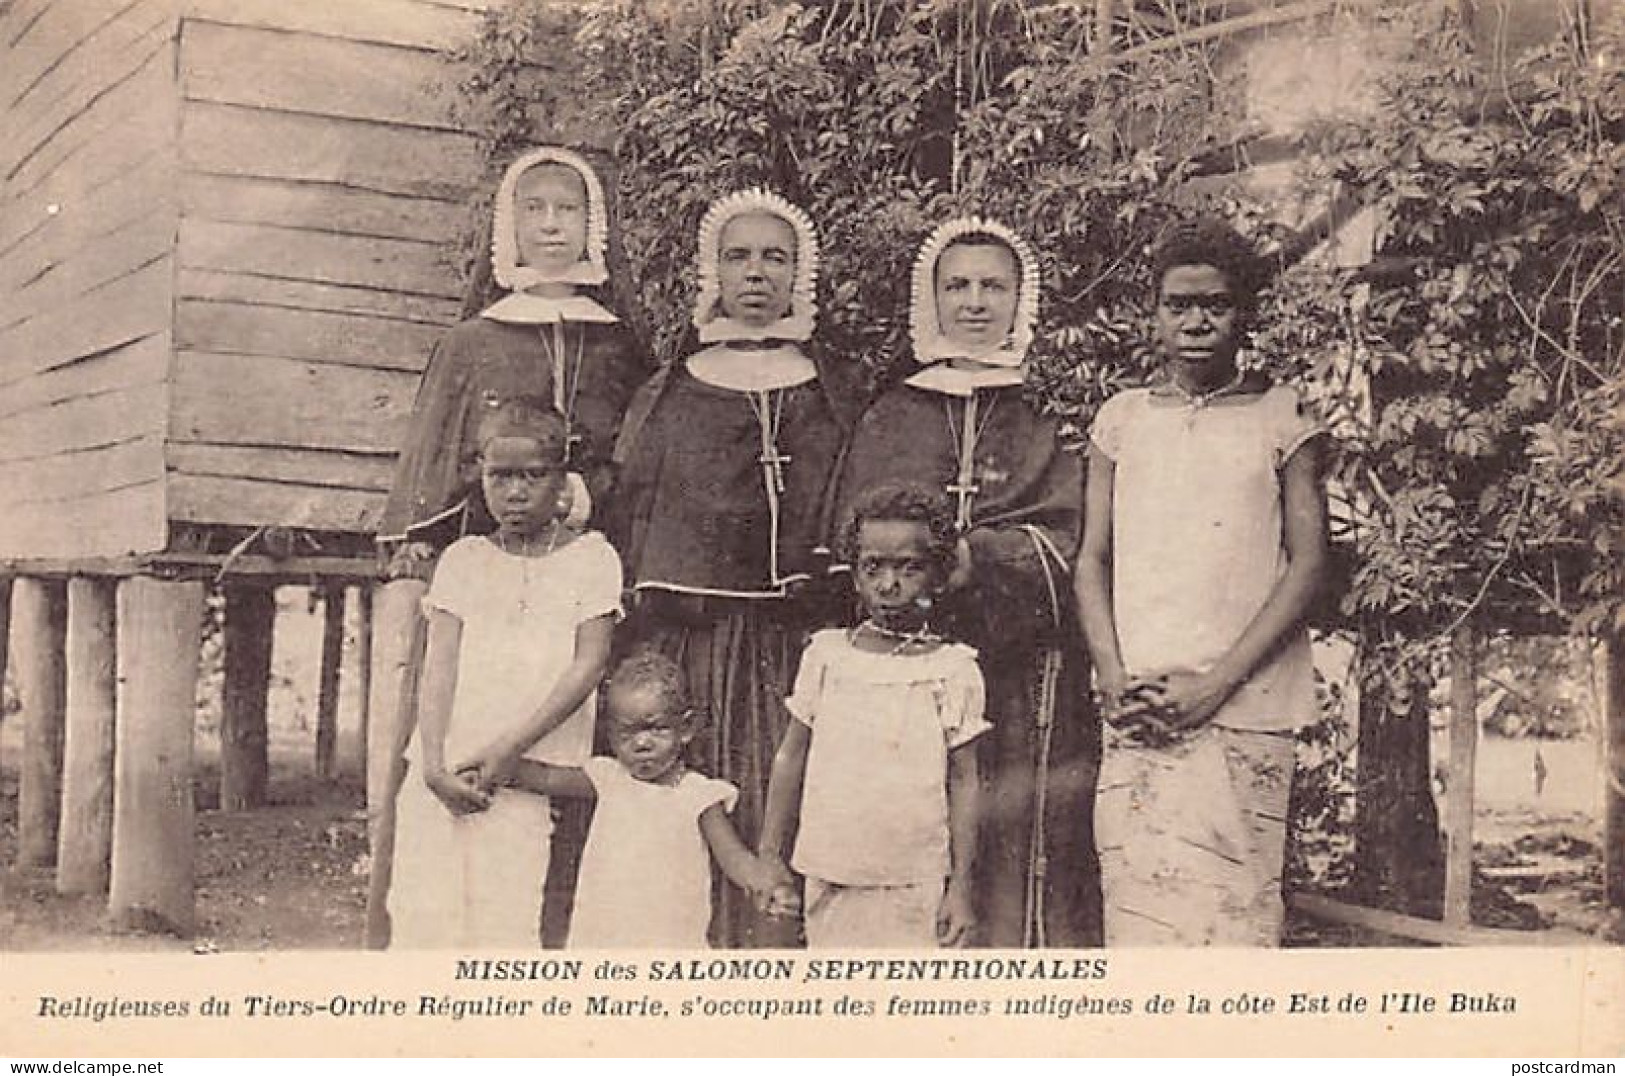 Papua New Guinea - BUKA ISLAND - Nuns Of The Third Order Regular Of Mary Caring For Indigenous Women On The East Coast O - Papua New Guinea